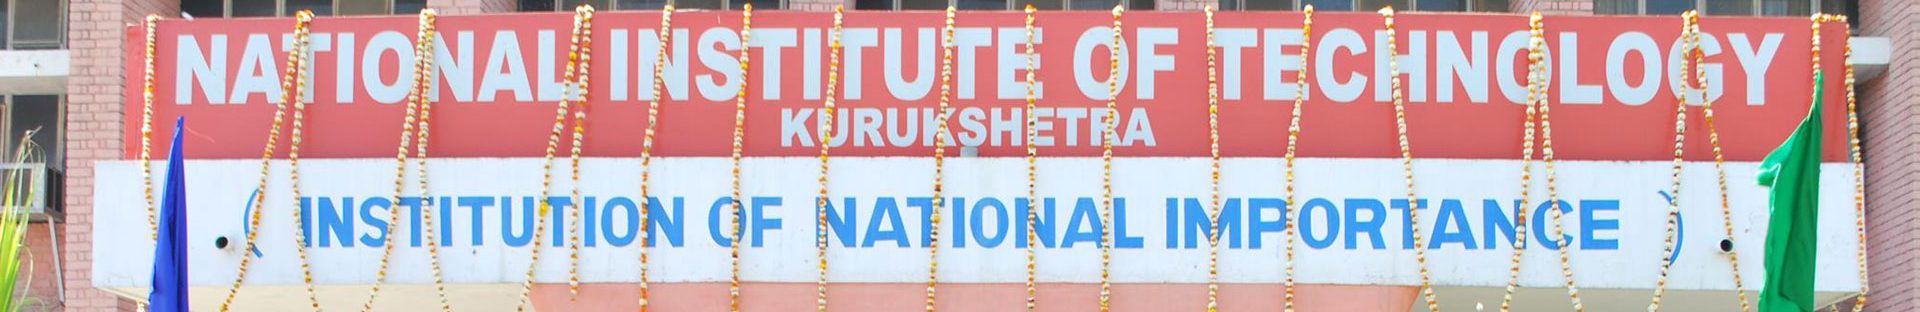 National Institute of Technology, kurukshetra is celebrating National Science week from 22nd to 28 February 2022